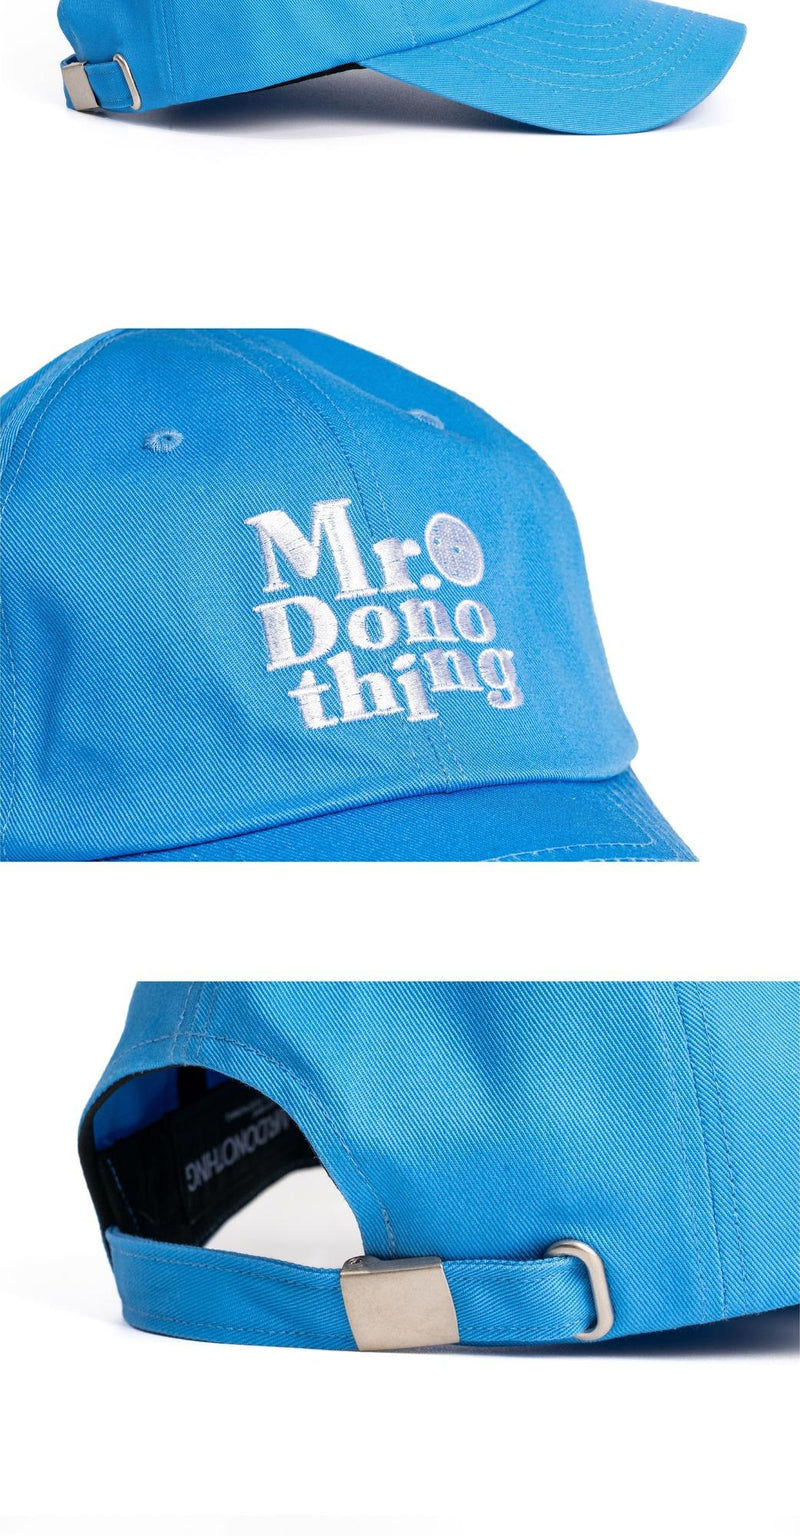 Mr.Donothing Ball Cap - Blue